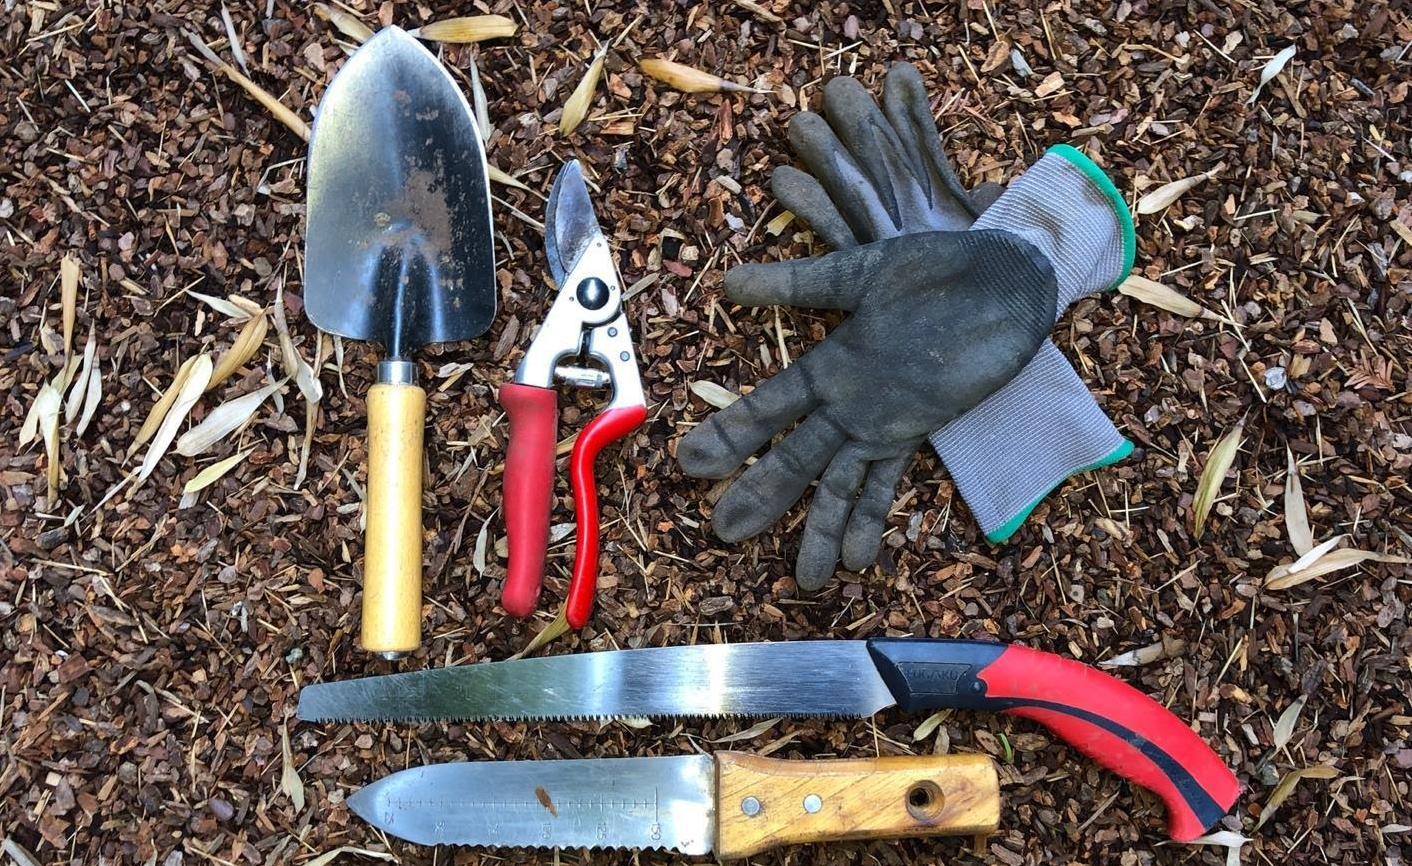 Tools from top left: trowel, bypass hand pruner, gloves, pruning saw, hori hori knife Photo: Fay Mark